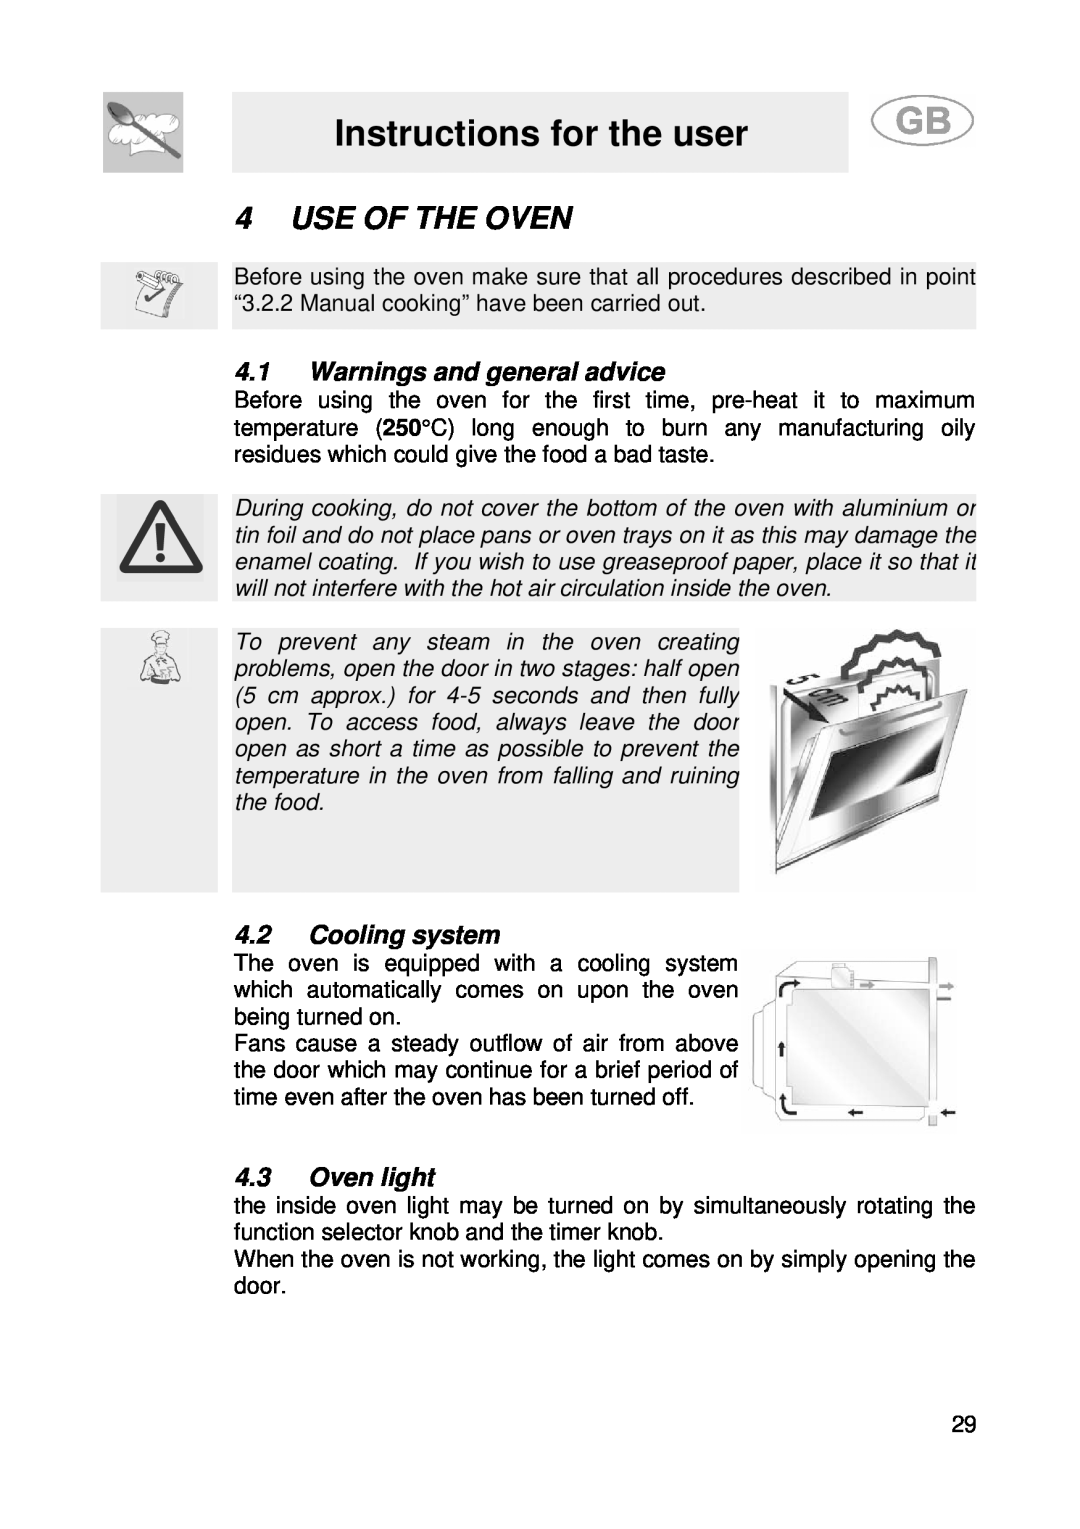 Smeg SE900-5 manual Use Of The Oven, Warnings and general advice, Cooling system, Oven light, Instructions for the user 